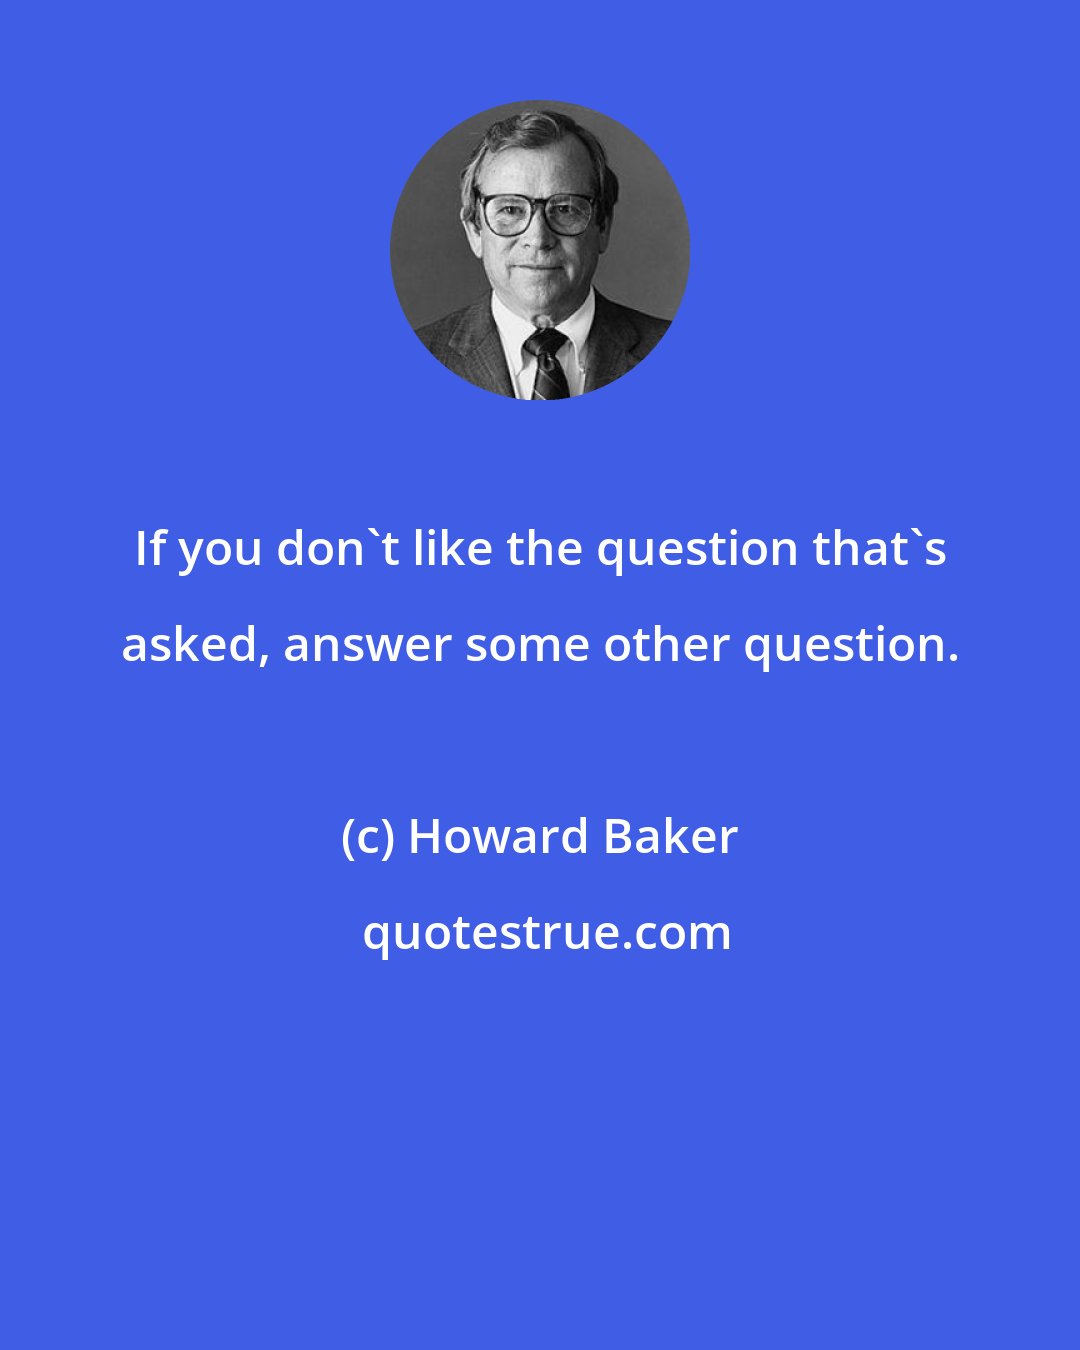 Howard Baker: If you don't like the question that's asked, answer some other question.